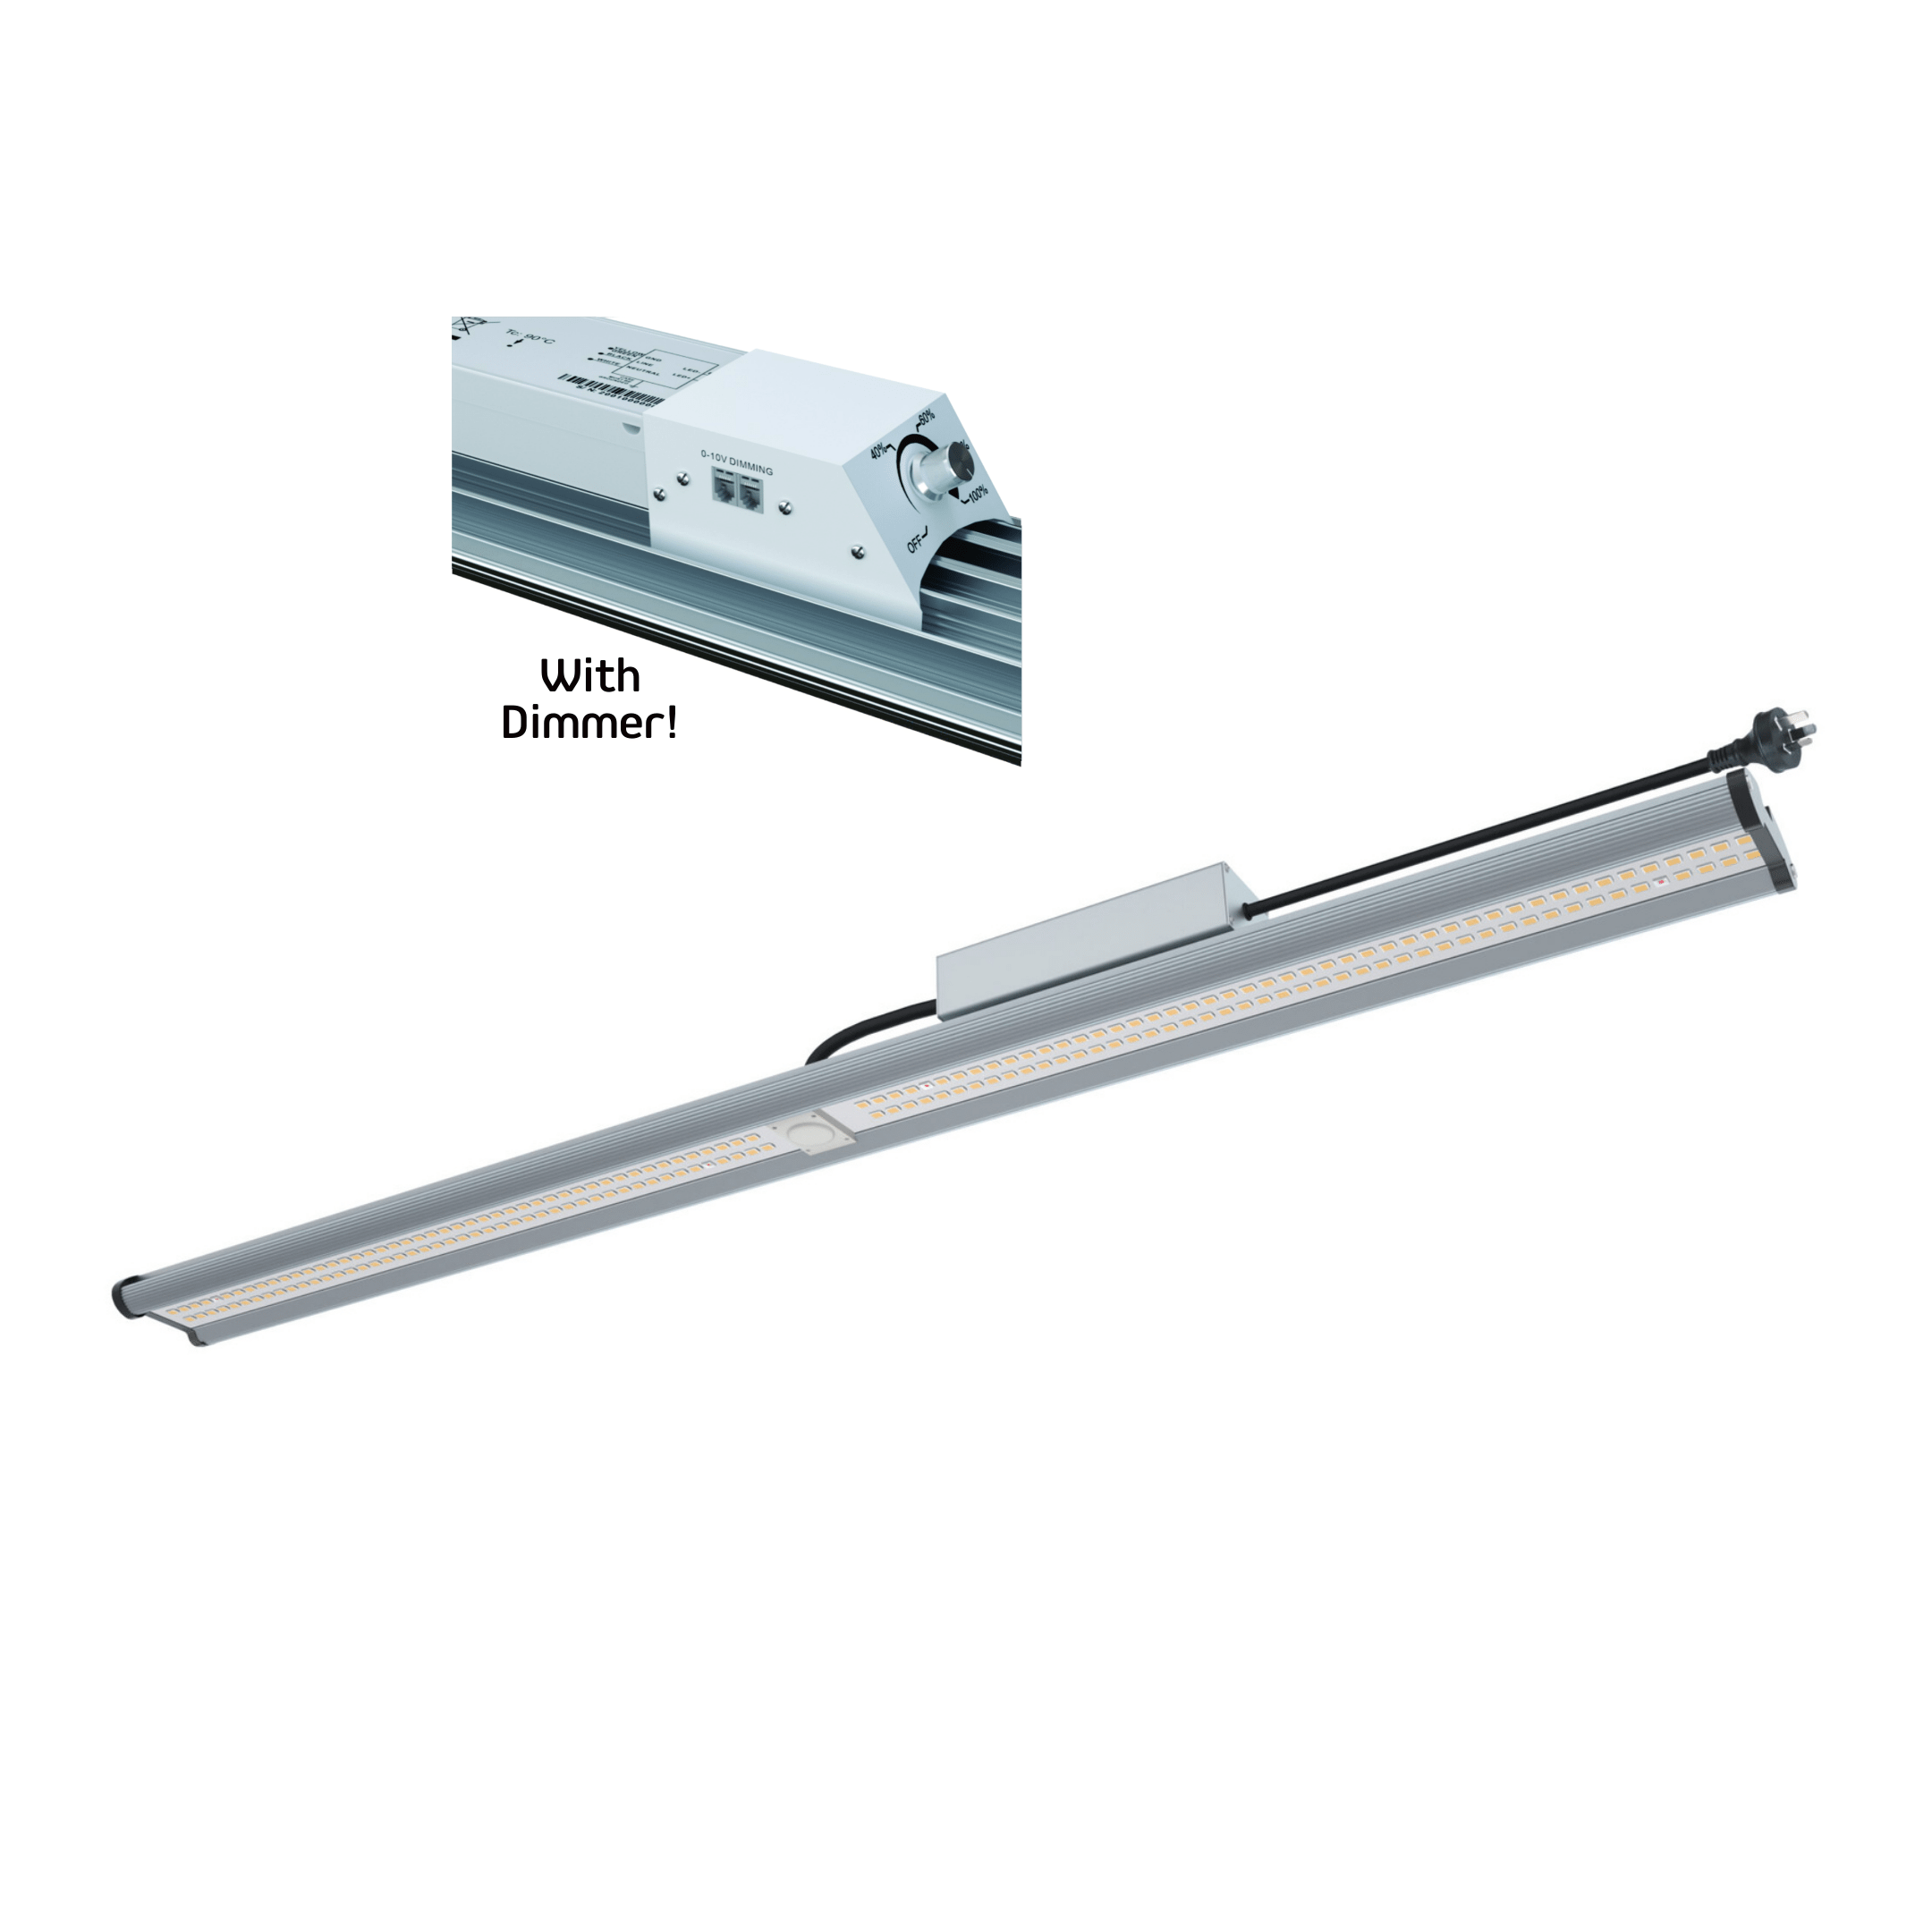 Pro Grow Hydroponic Supplies > Lighting > LED Lights Pro Grow 60w LED Light Bar - Dimmable!